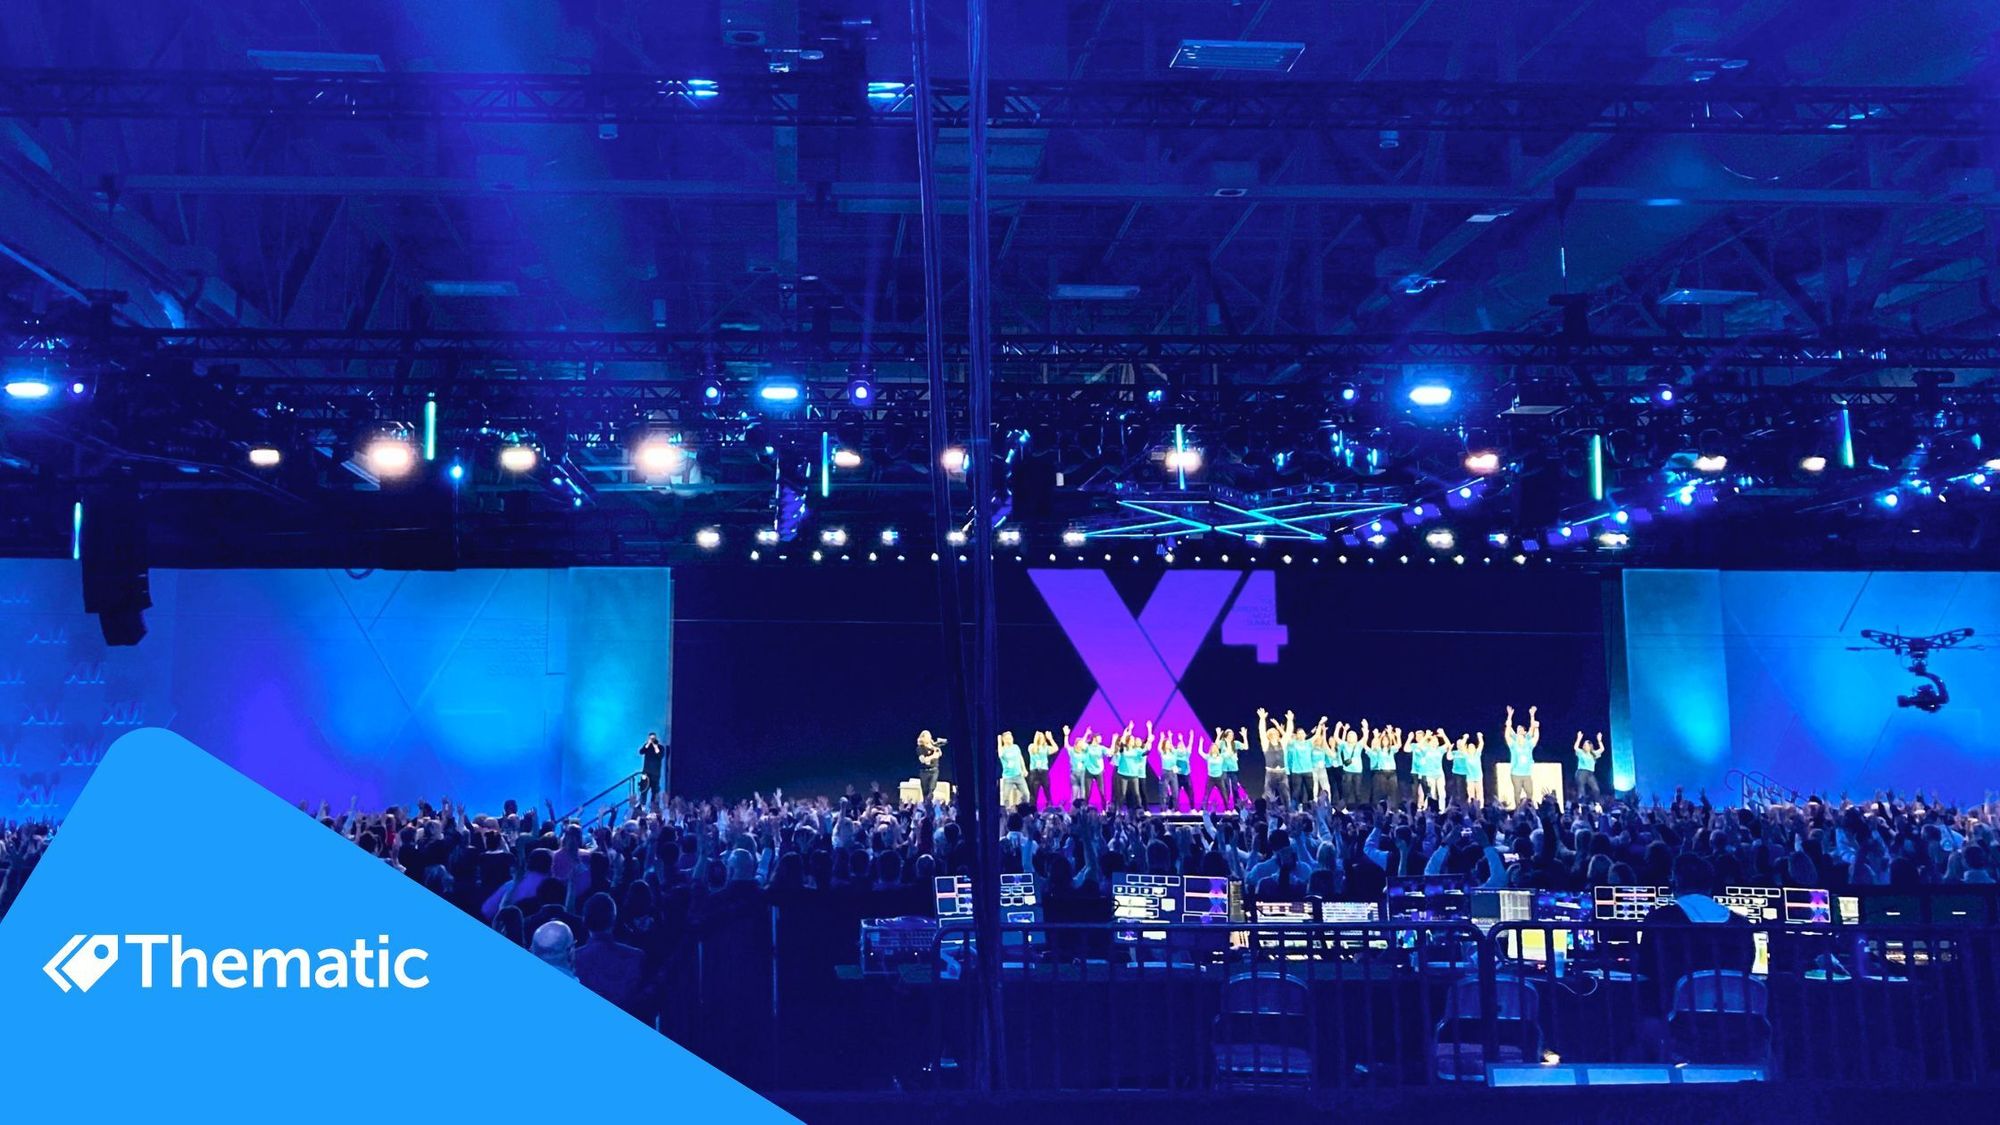 What is it like to attend the Qualtrics X4 Summit? And is it worth it?